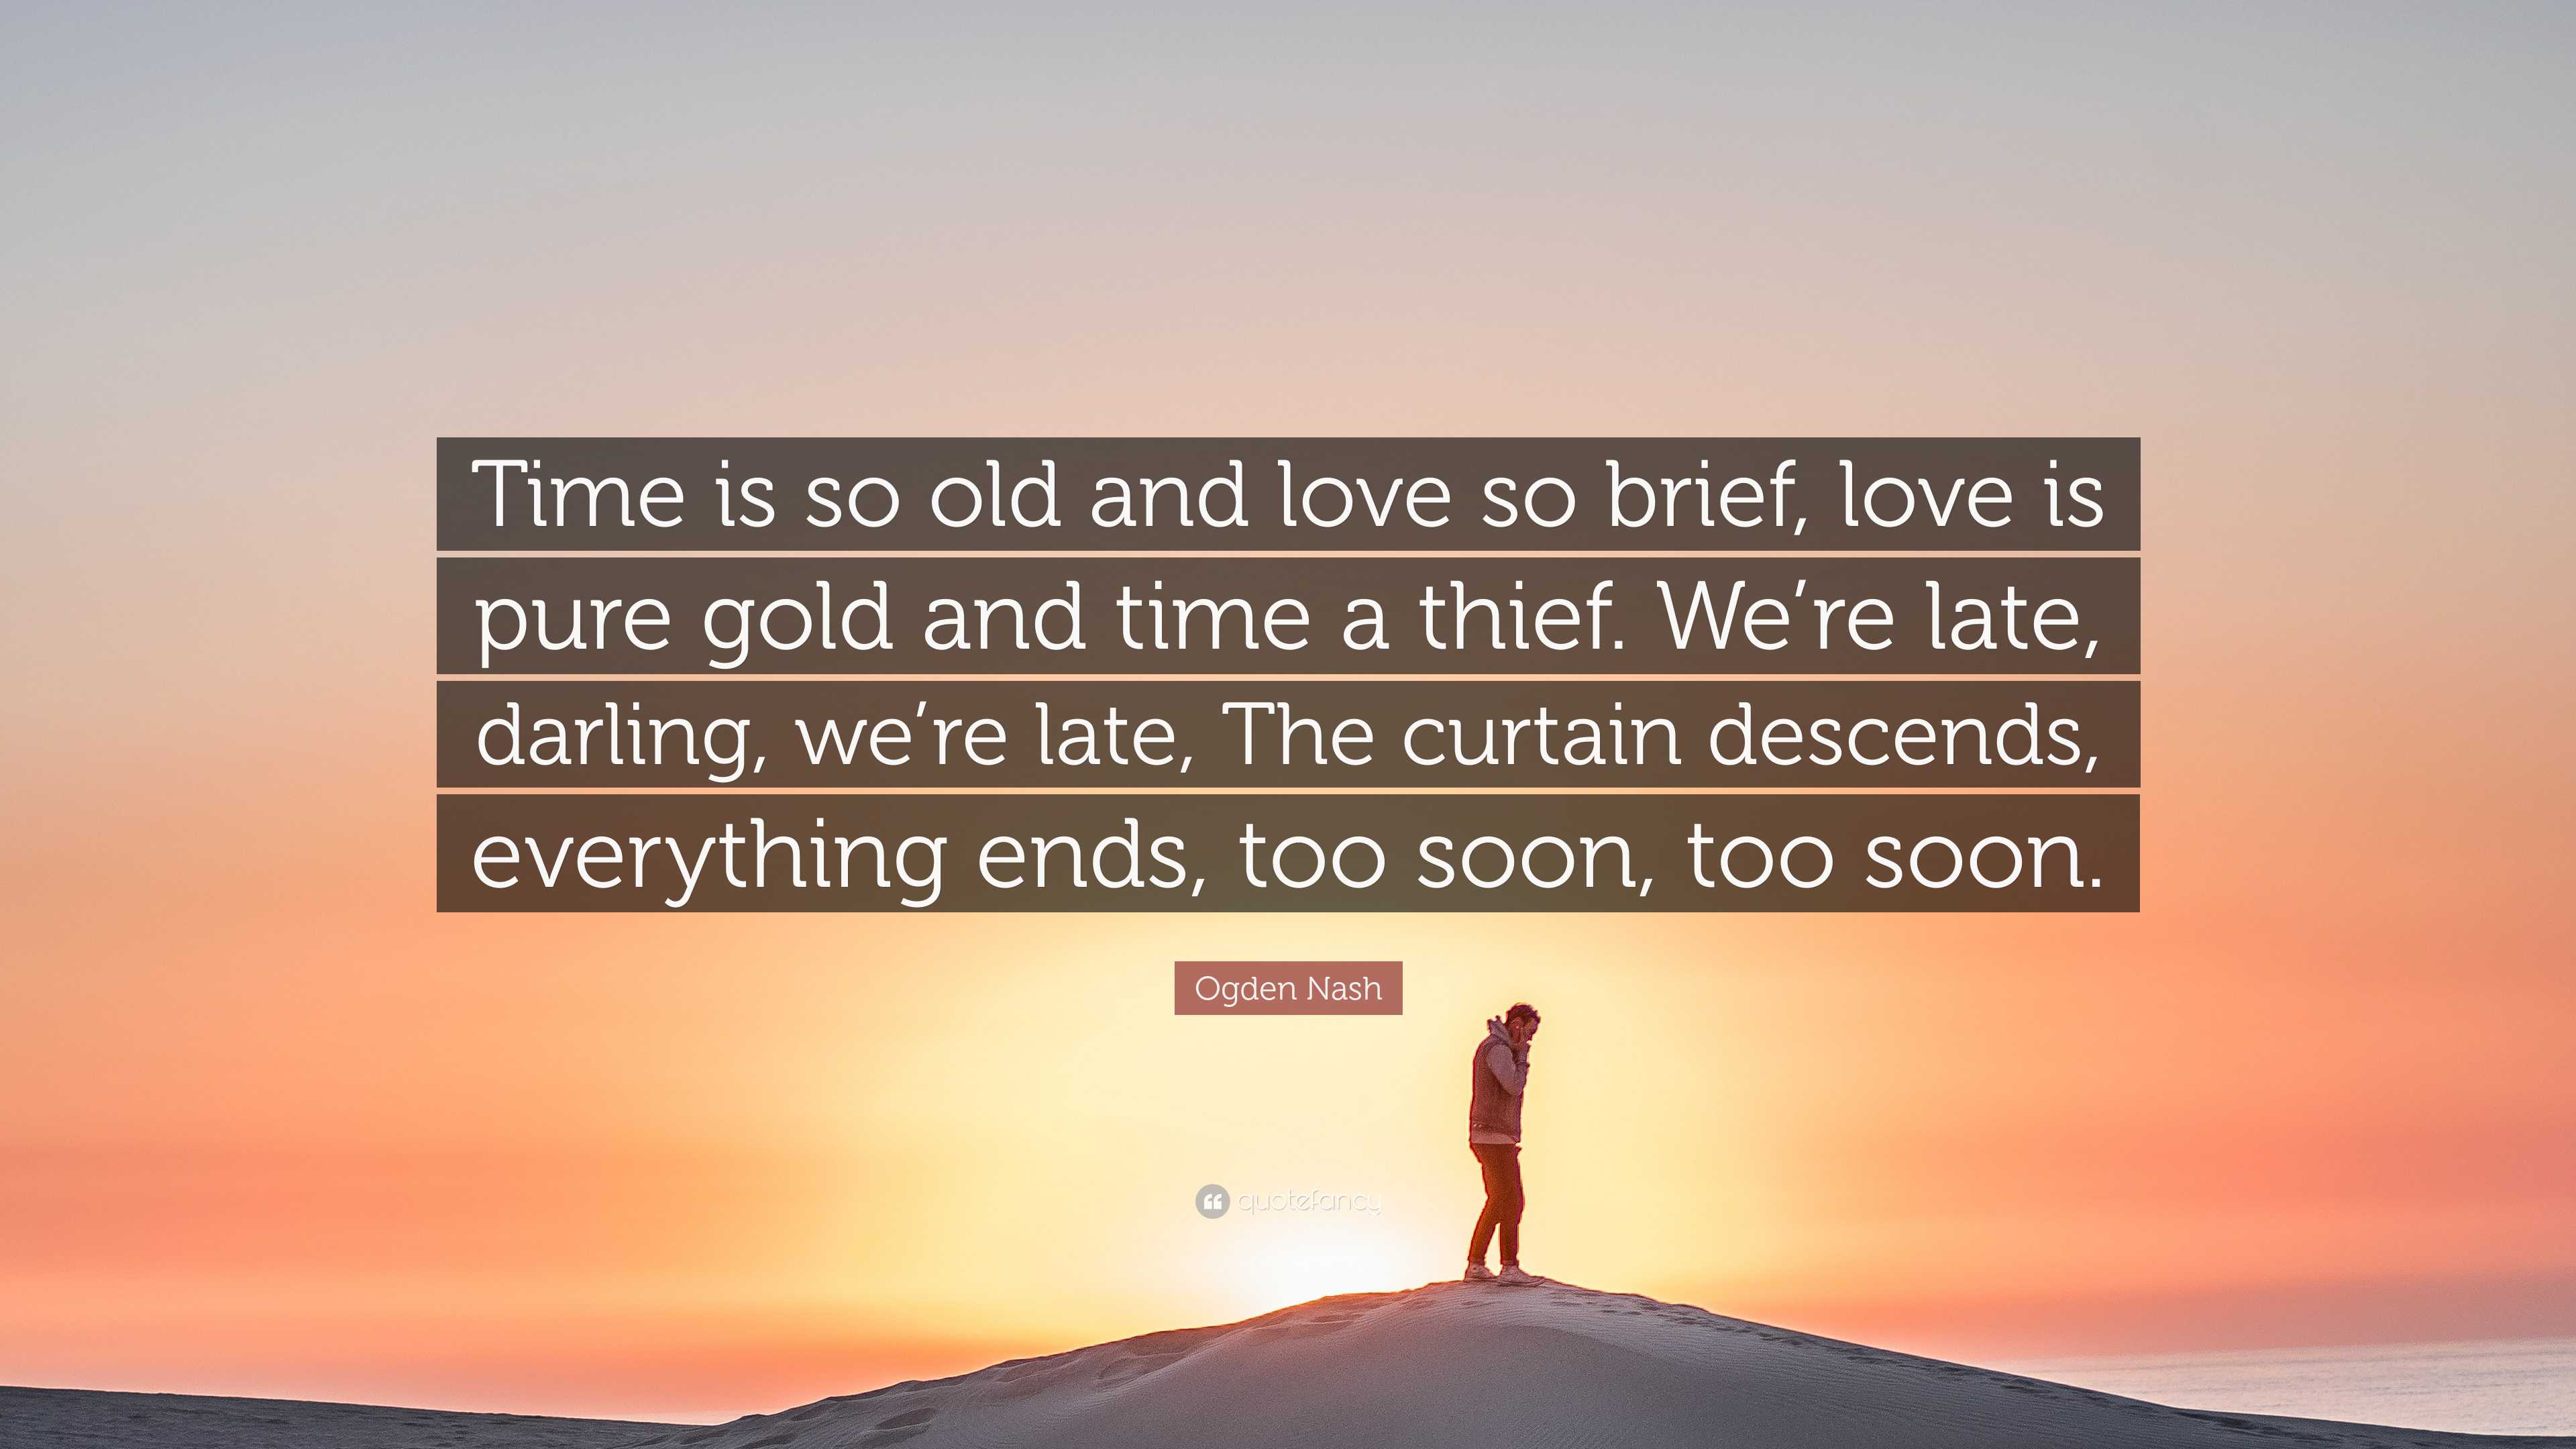 Ogden Nash Quote: “Time is so old and love so brief, love is pure gold and  time a thief. We're late, darling, we're late, The curtain desce”